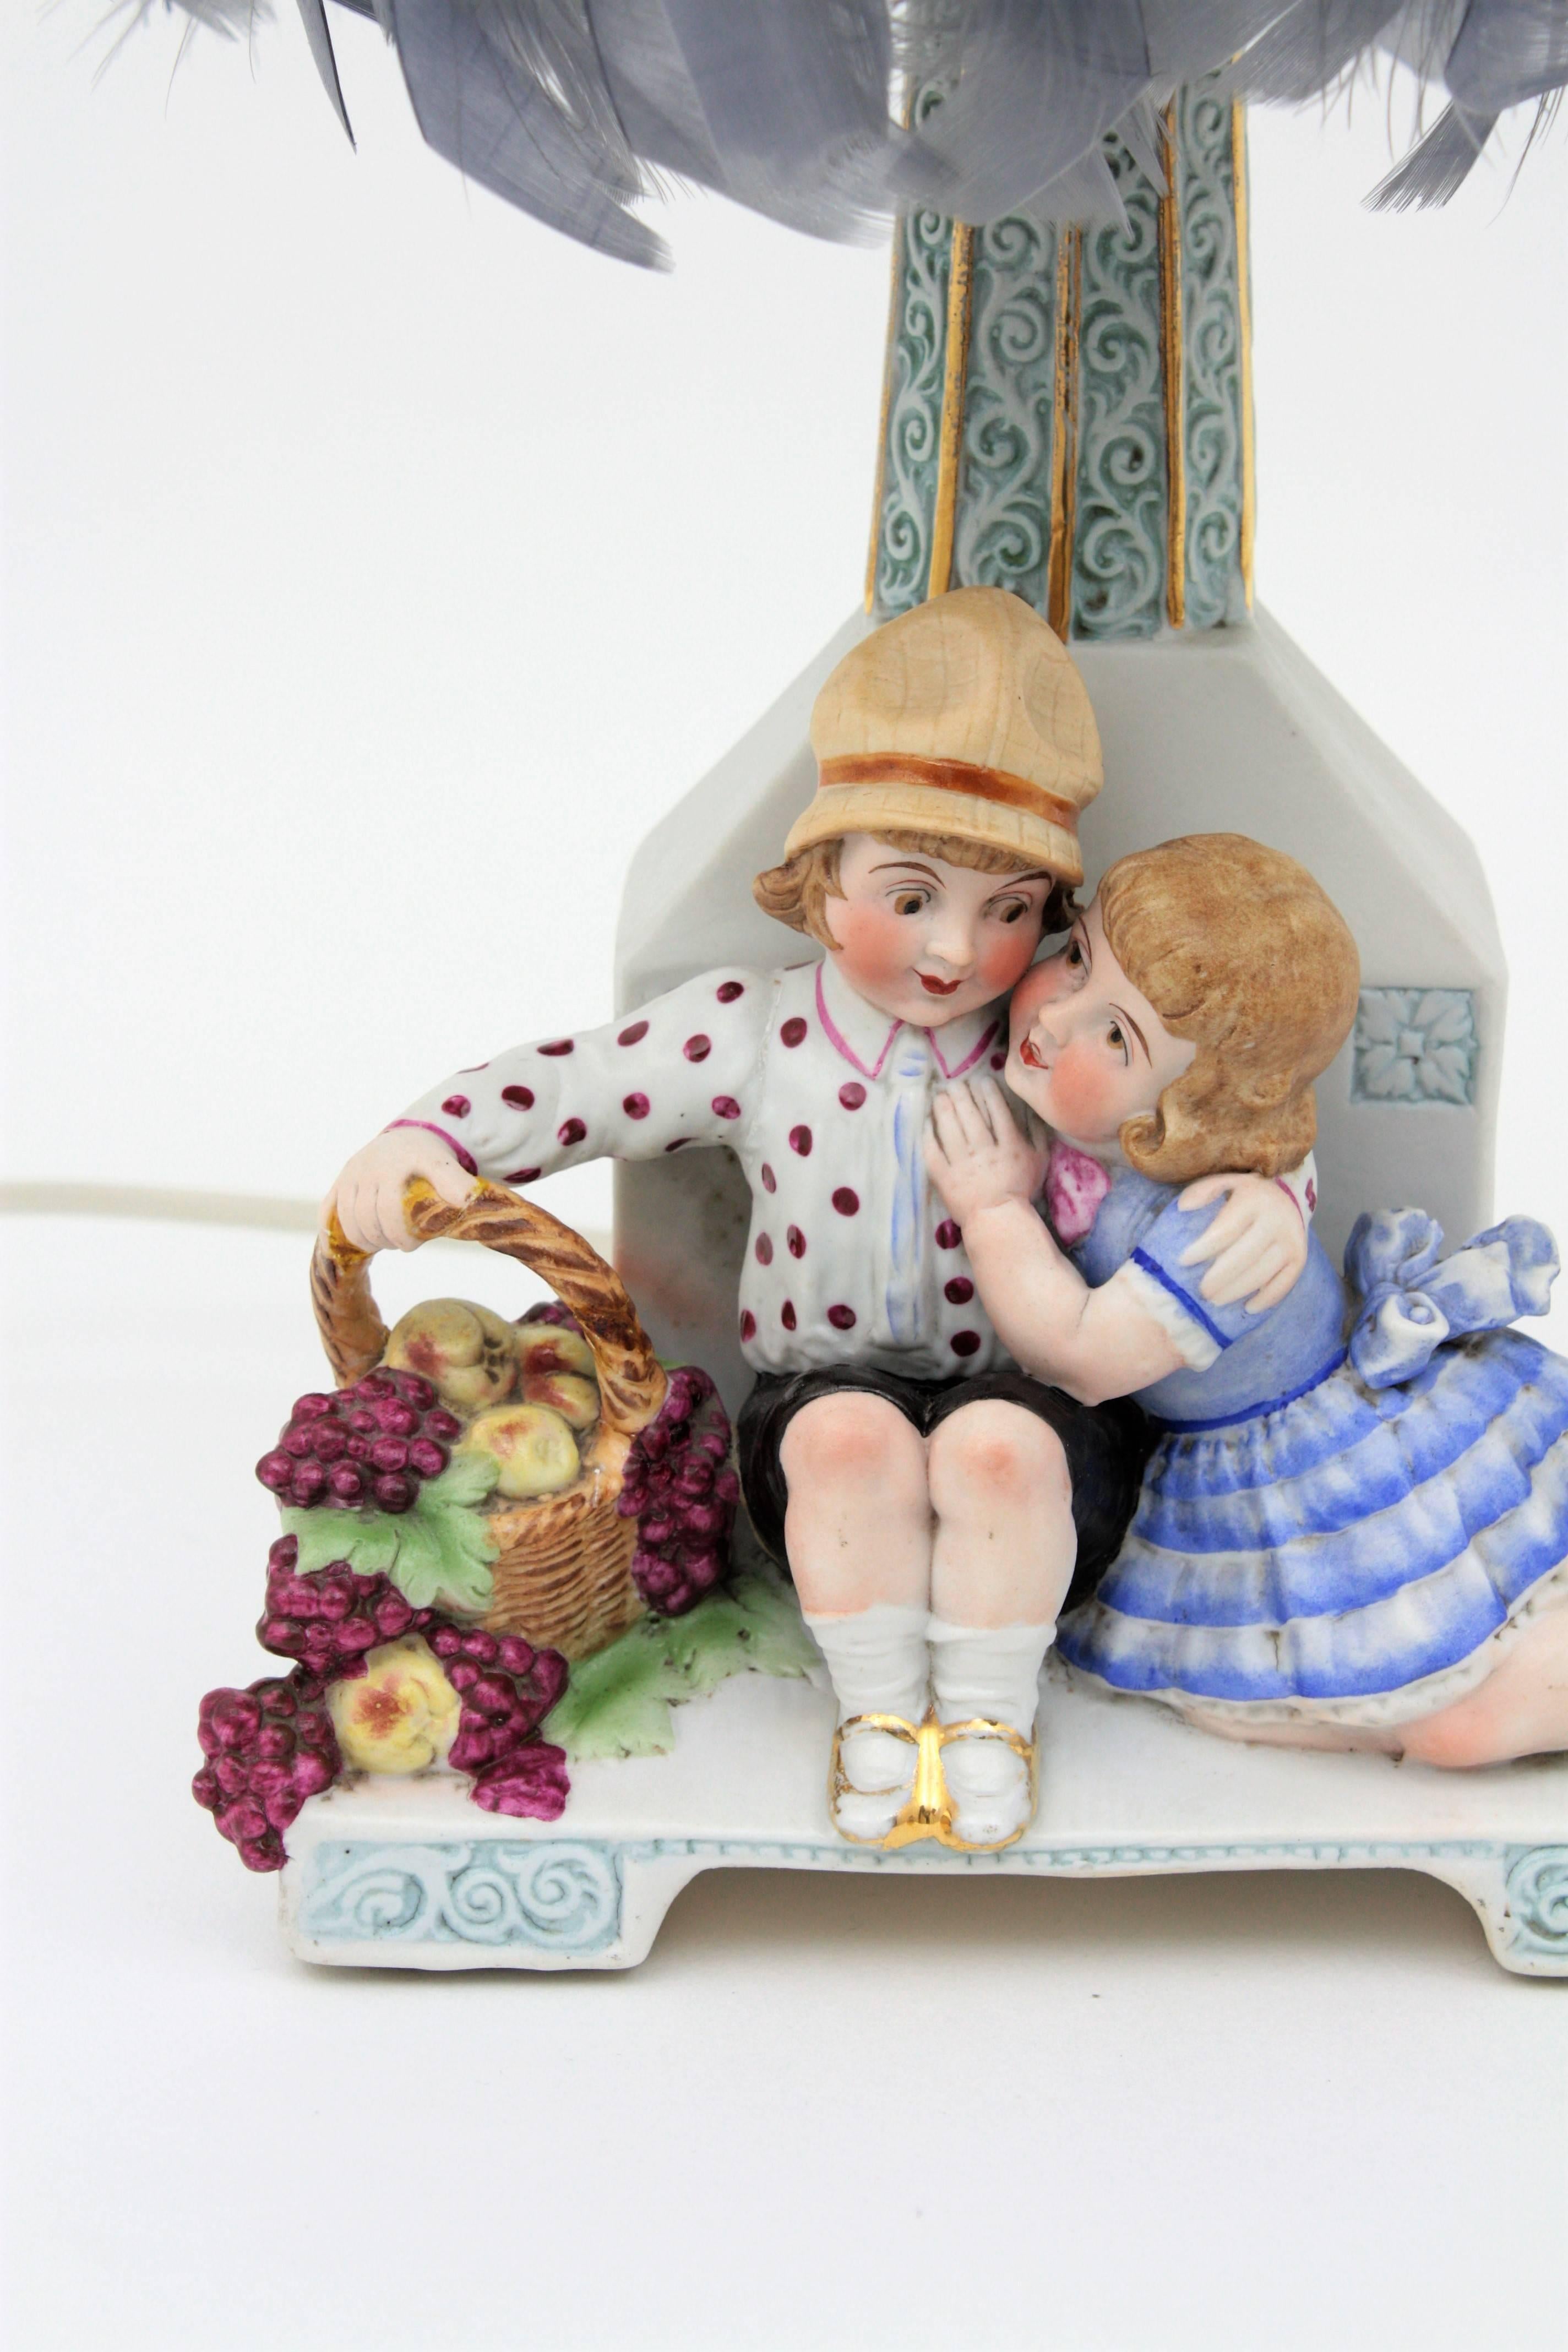 A lovely hand painted biscuit porcelain table lamp with children figures wearing a fruit basket with feathers silk shade. England, 1930s.
The column holding the lamp has a beautiful decoration with engraved pattern painted in baby blue color with